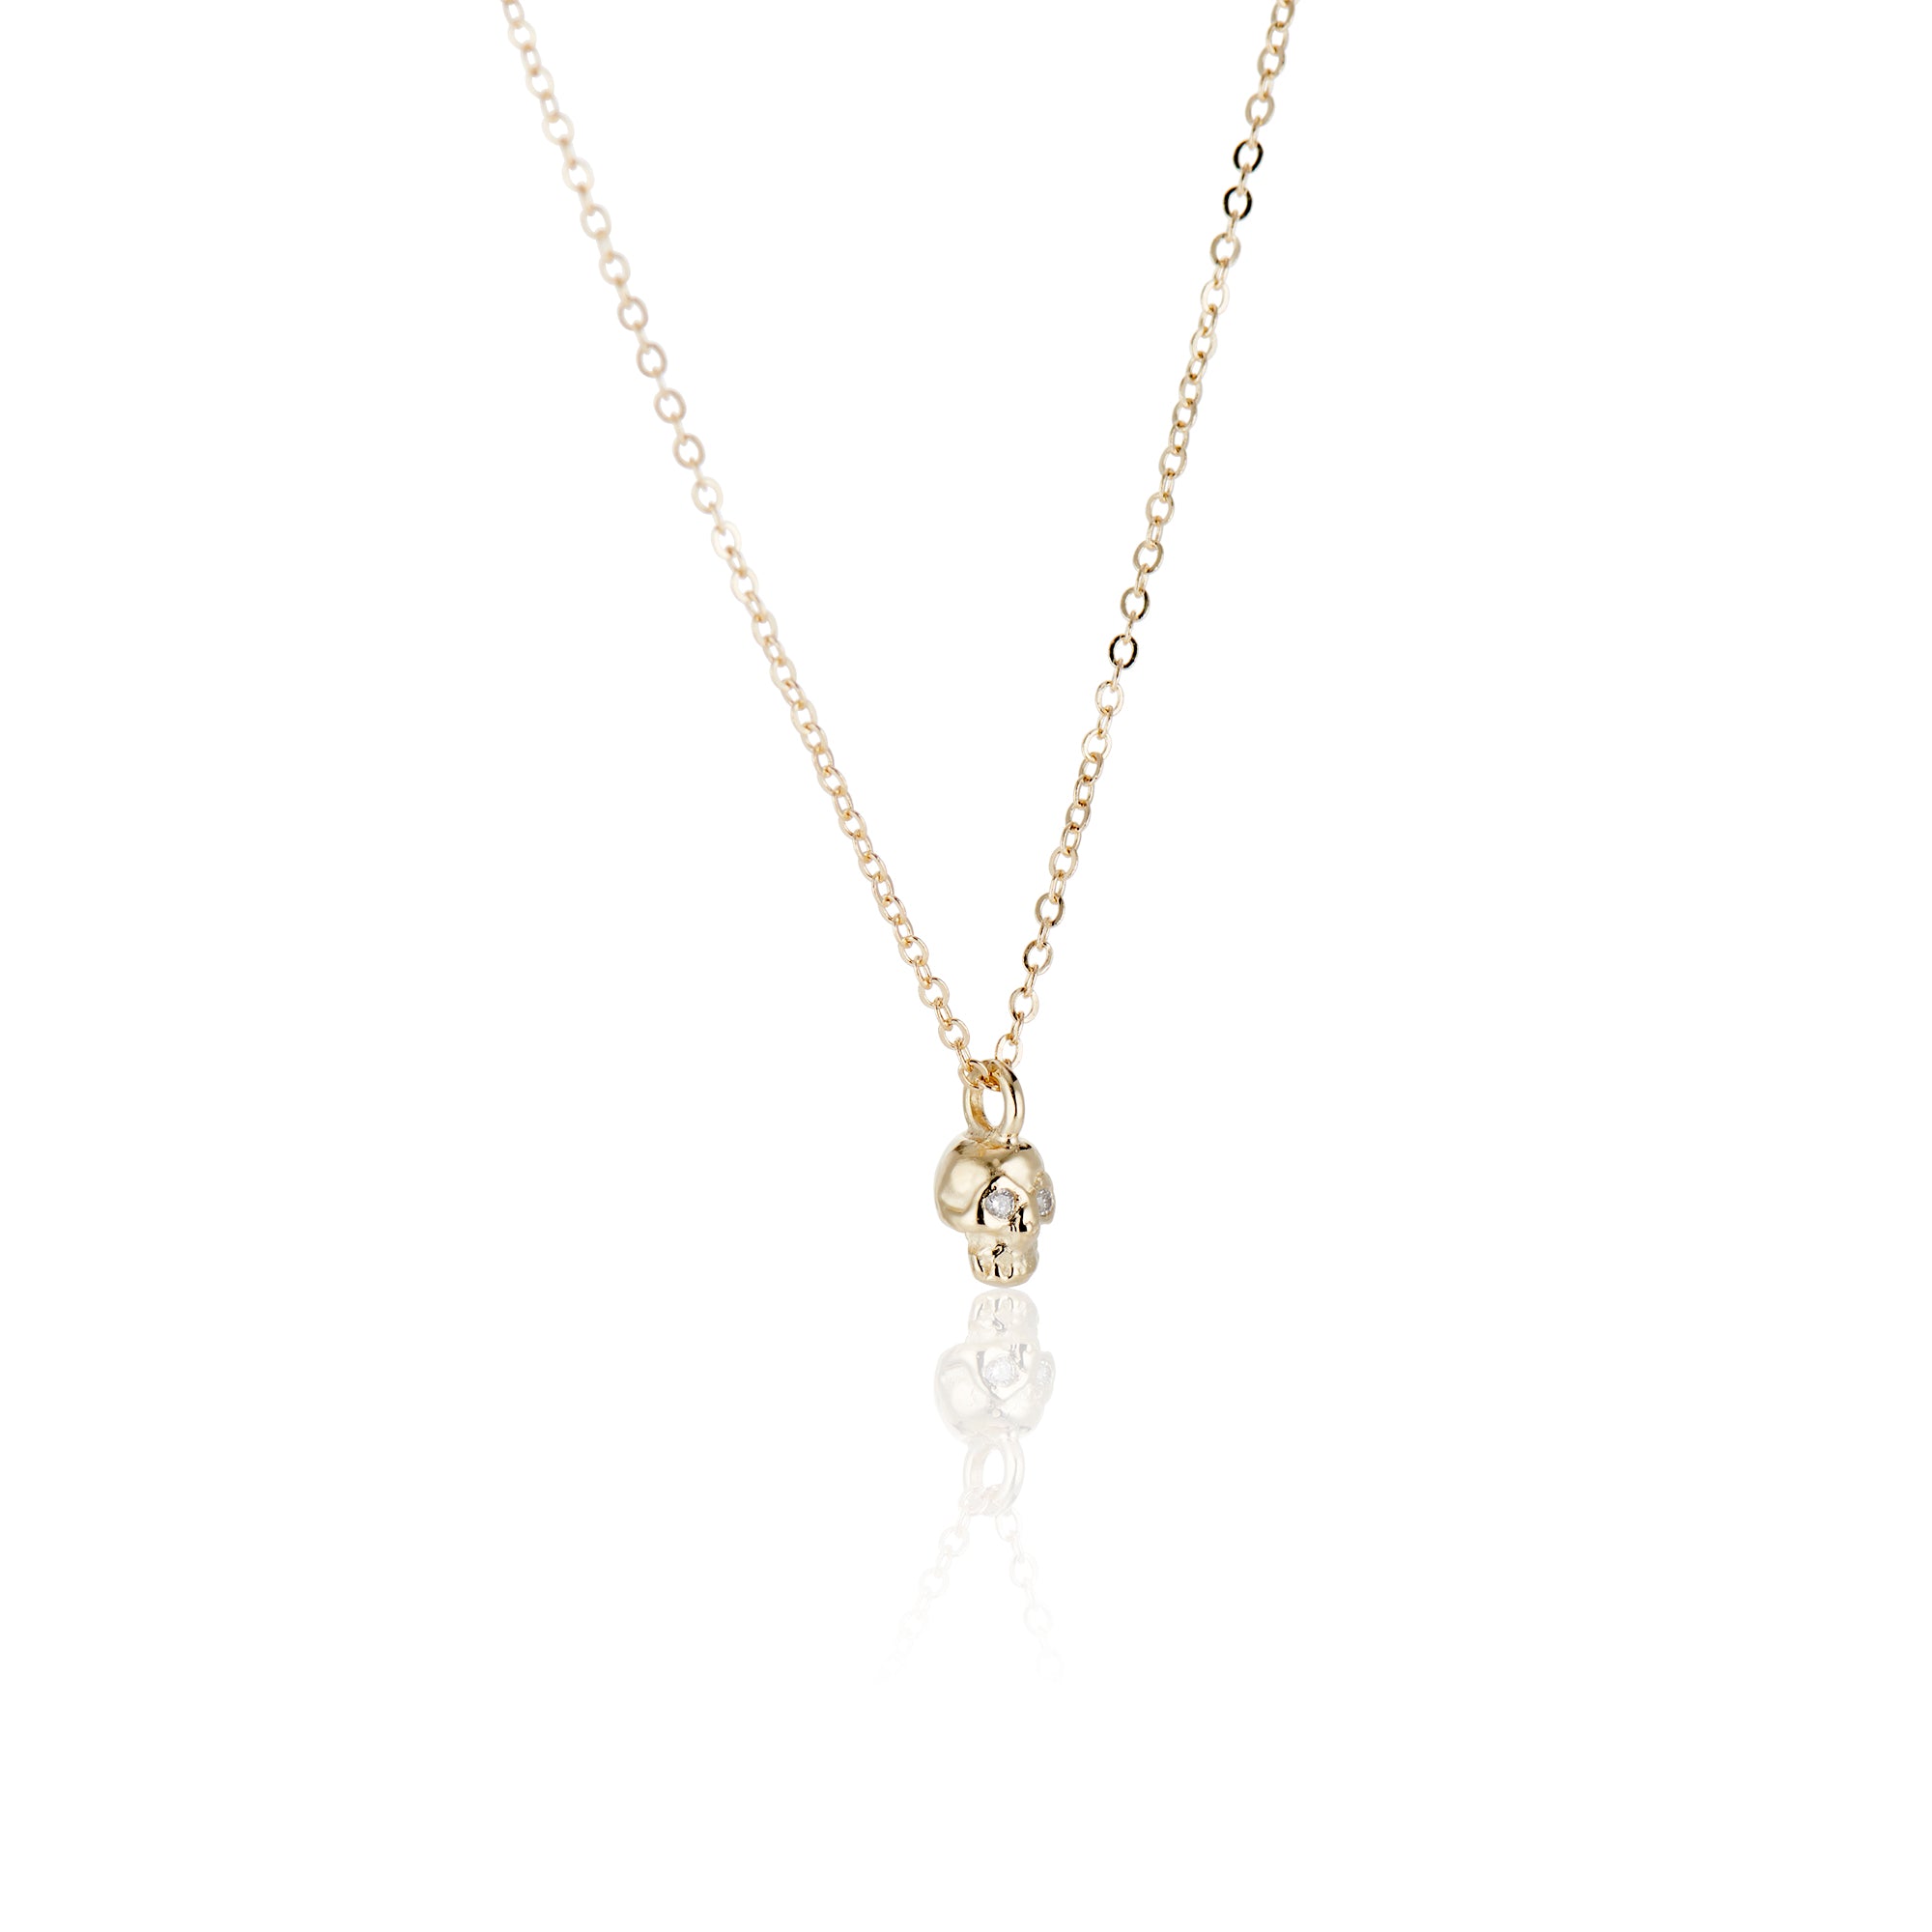 Teensy Memento Mori Skull Necklace - Charlie and Marcelle